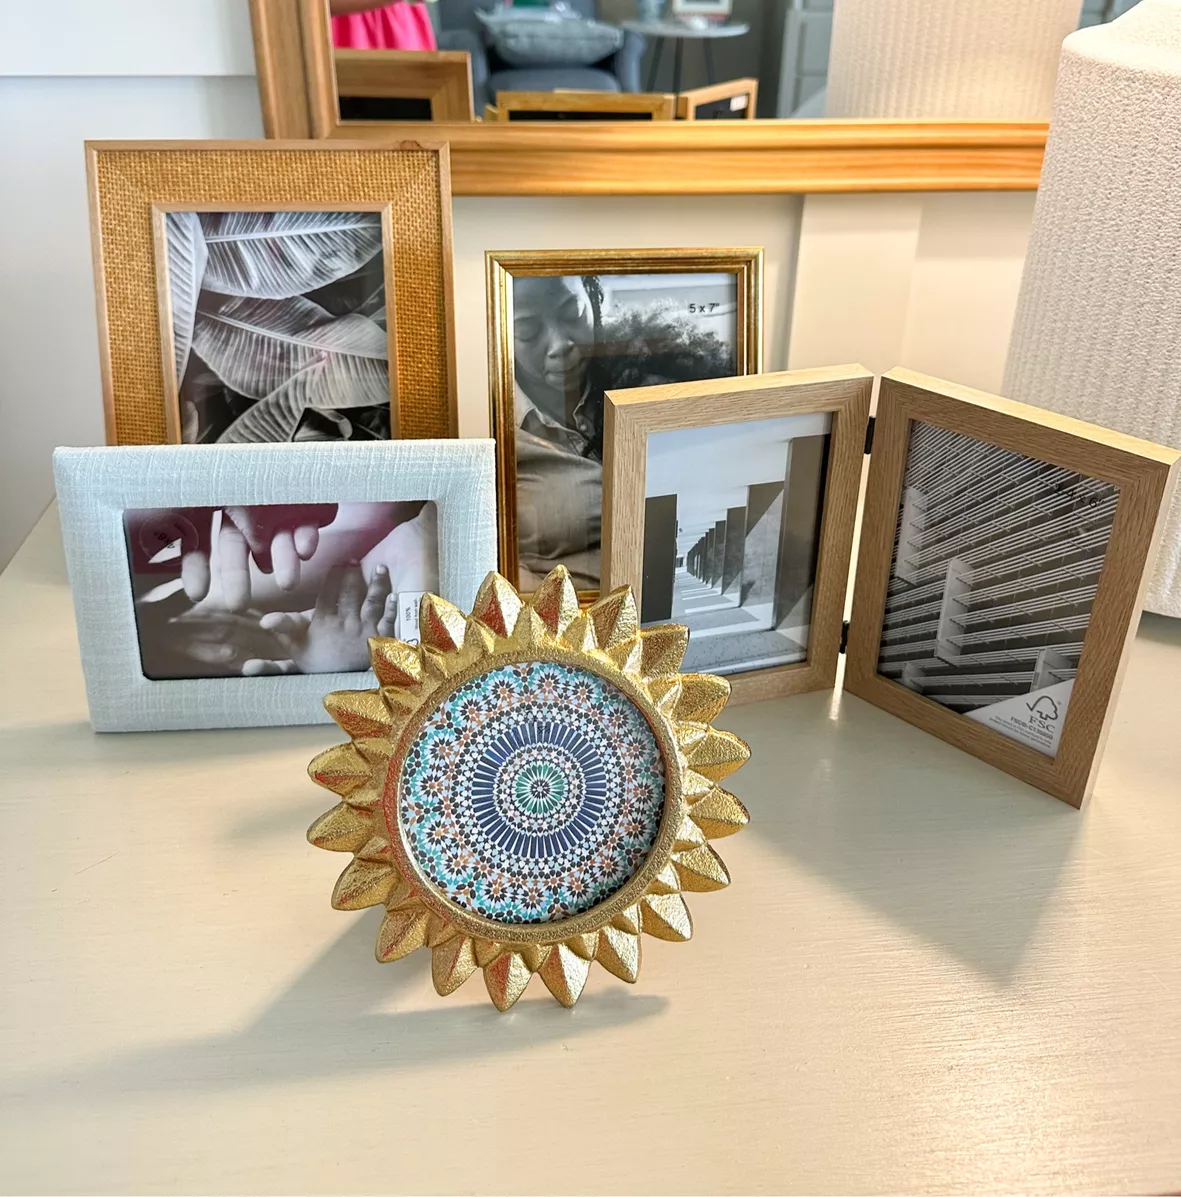 Small Photo Frames : Target